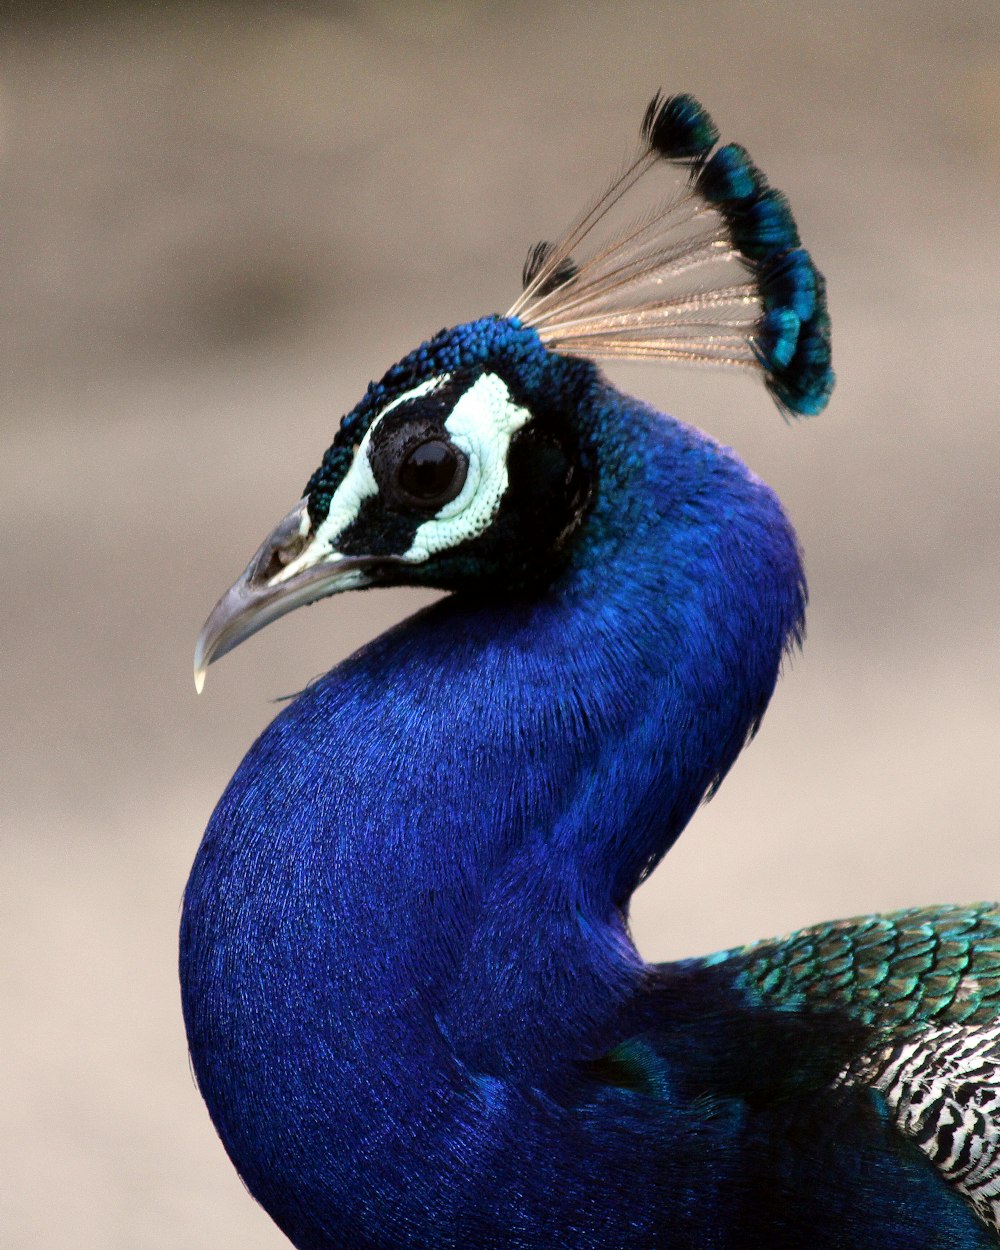 a blue bird with a black head and white and blue feathers